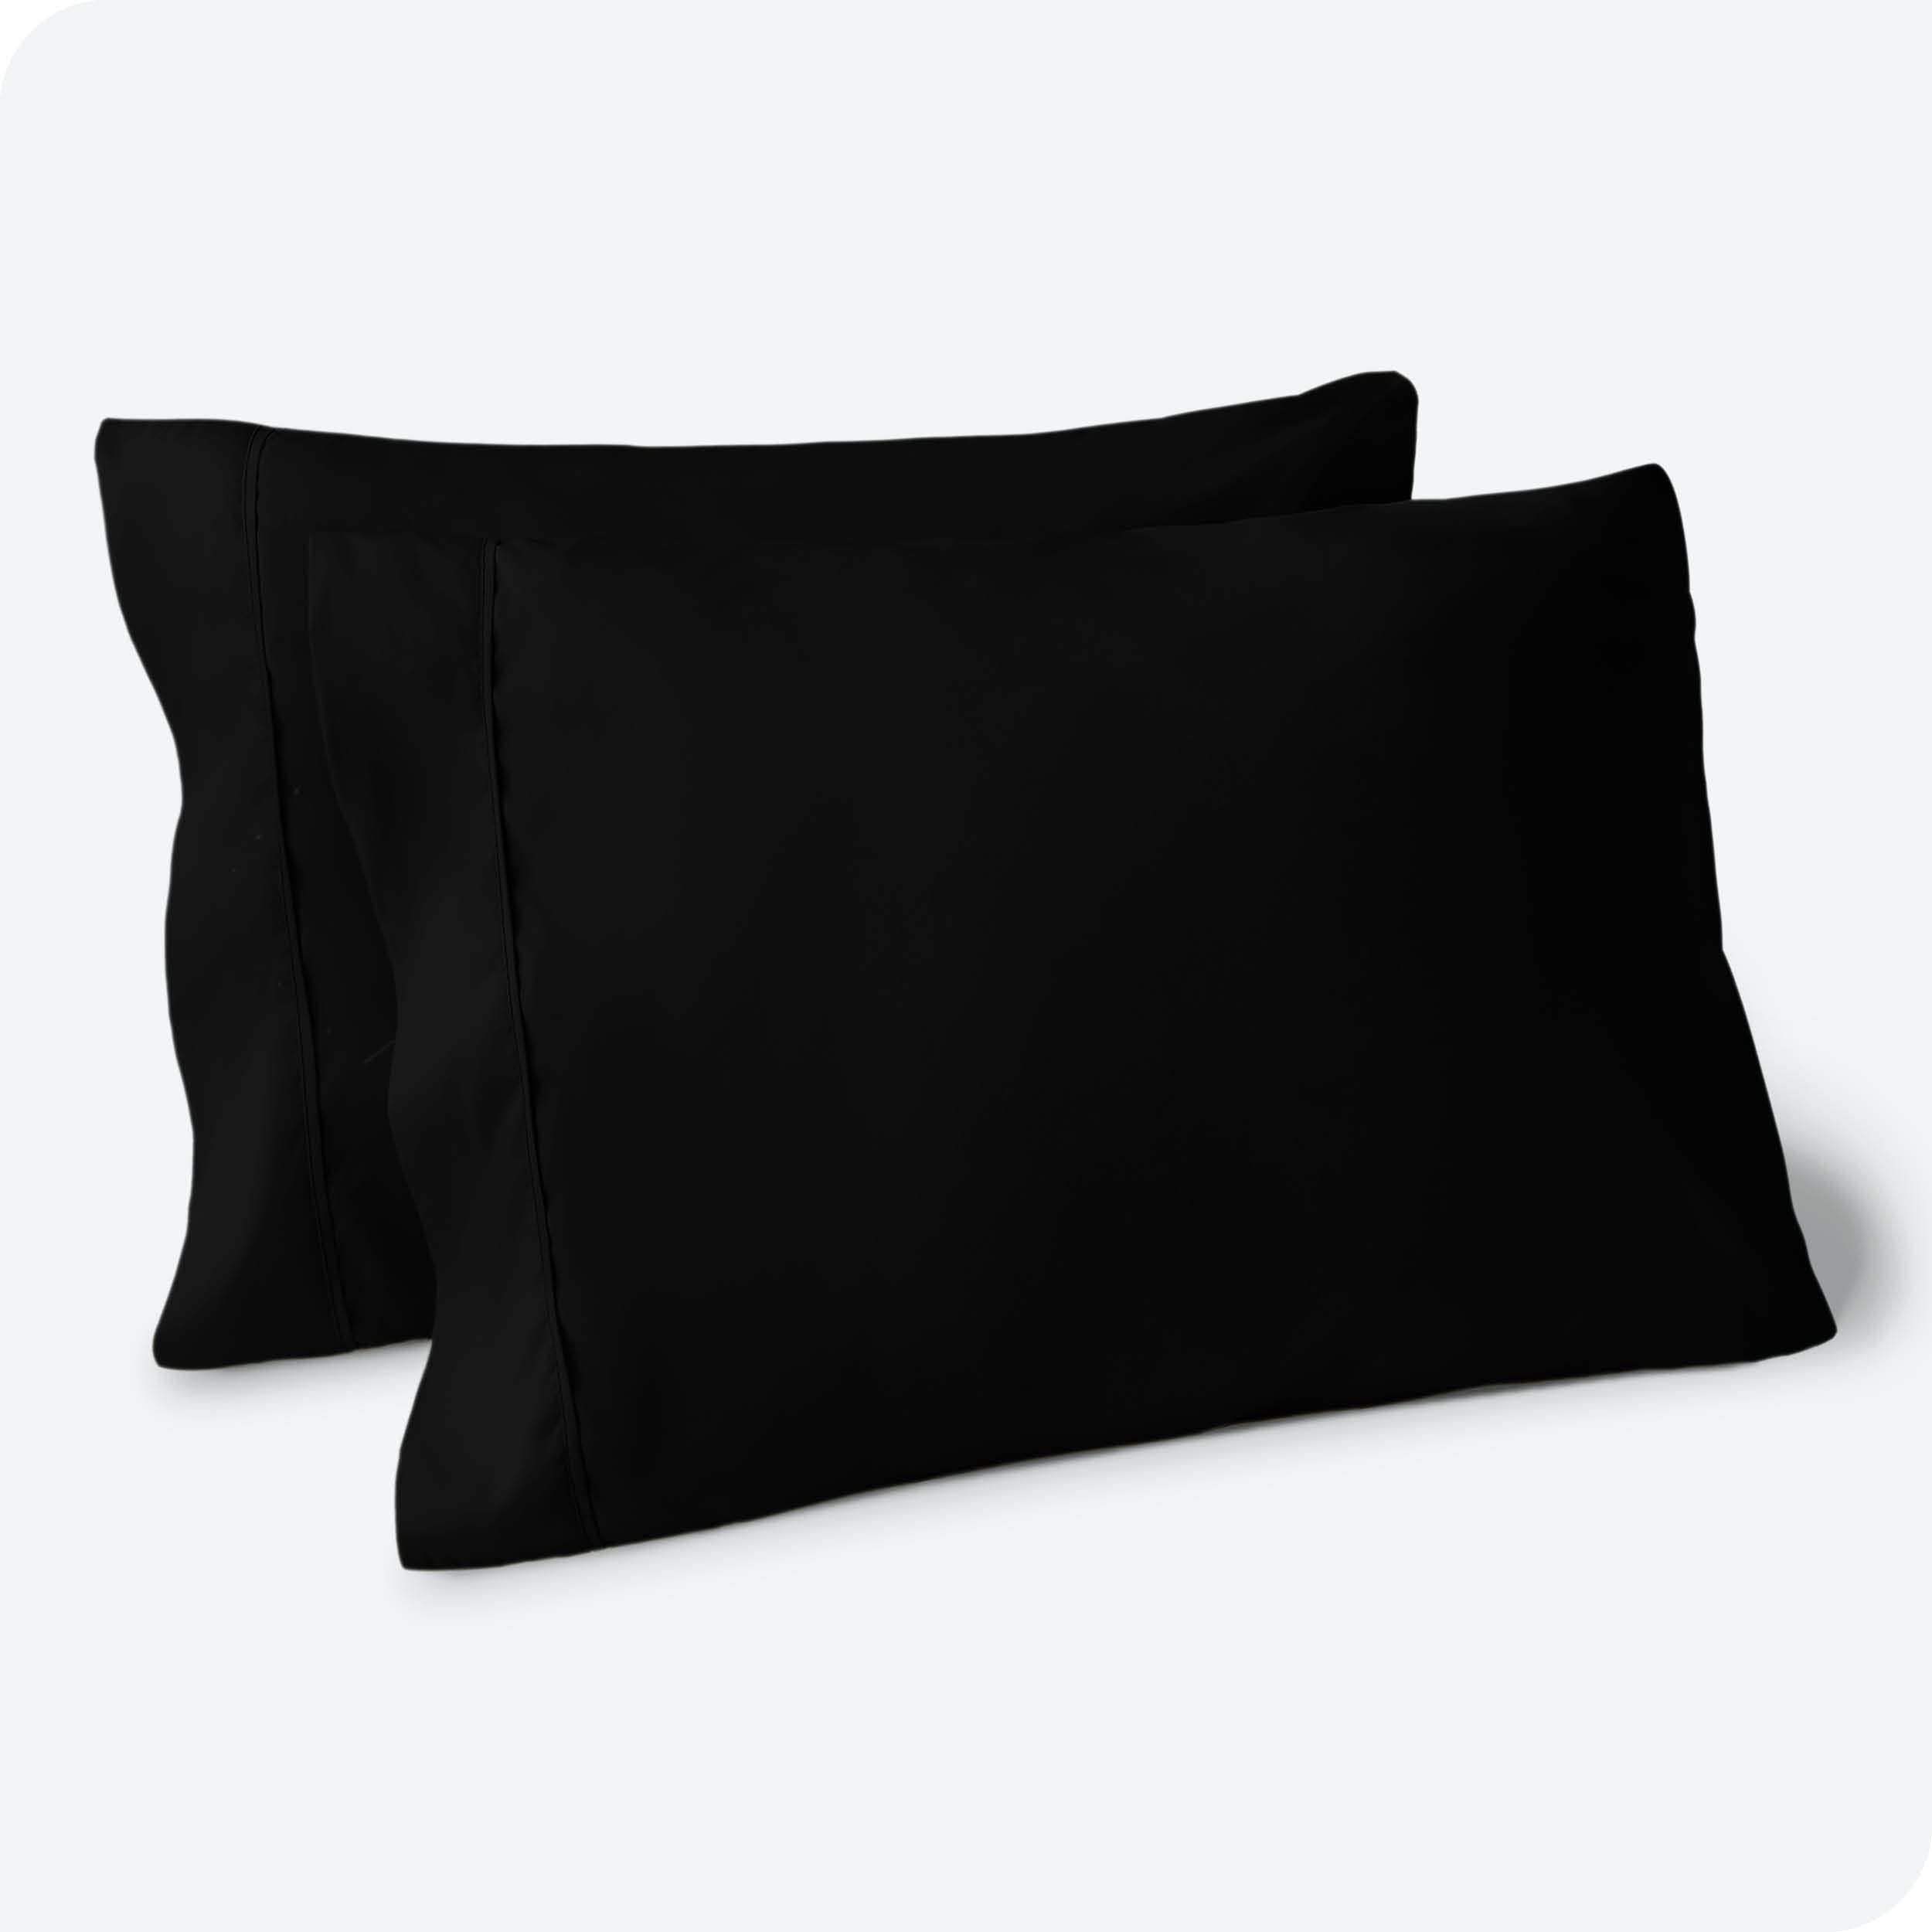 Book Cover Bare Home Microfiber Pillow Cases - Standard/Queen Size Set of 2 - Cooling Pillowcases - Double Brushed - Black Pillowcases 2 Pack - Easy Care (Standard Pillowcase Set of 2, Black) 20x30 Standard/Queen (2 Pack) 02 - Black